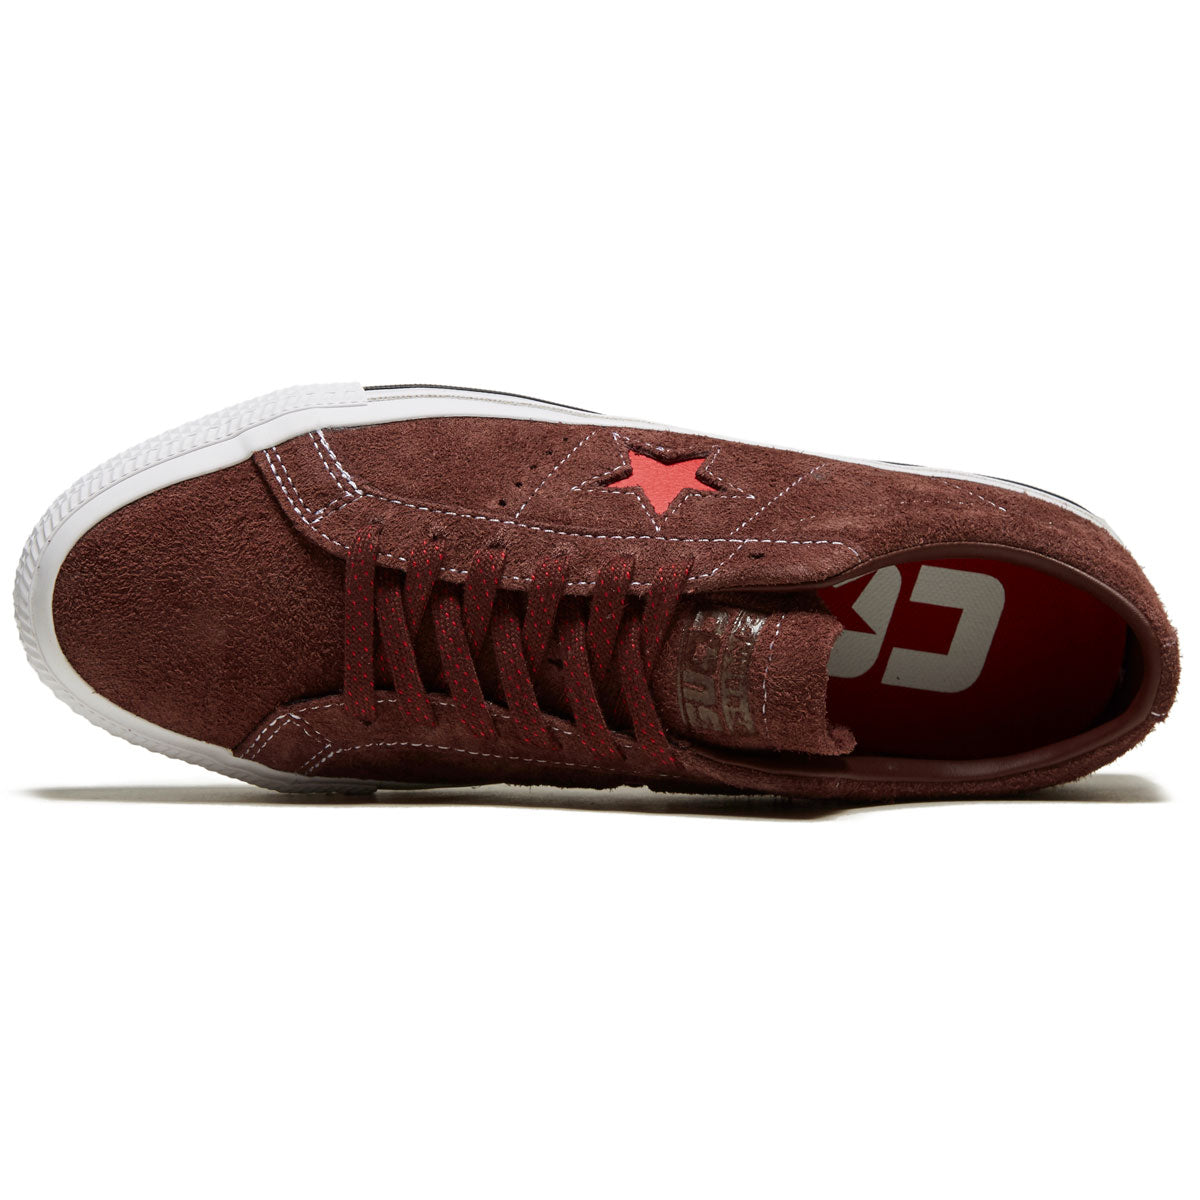 Converse One Star Pro Ox Shoes - Eternal Earth/White/Red – CCS